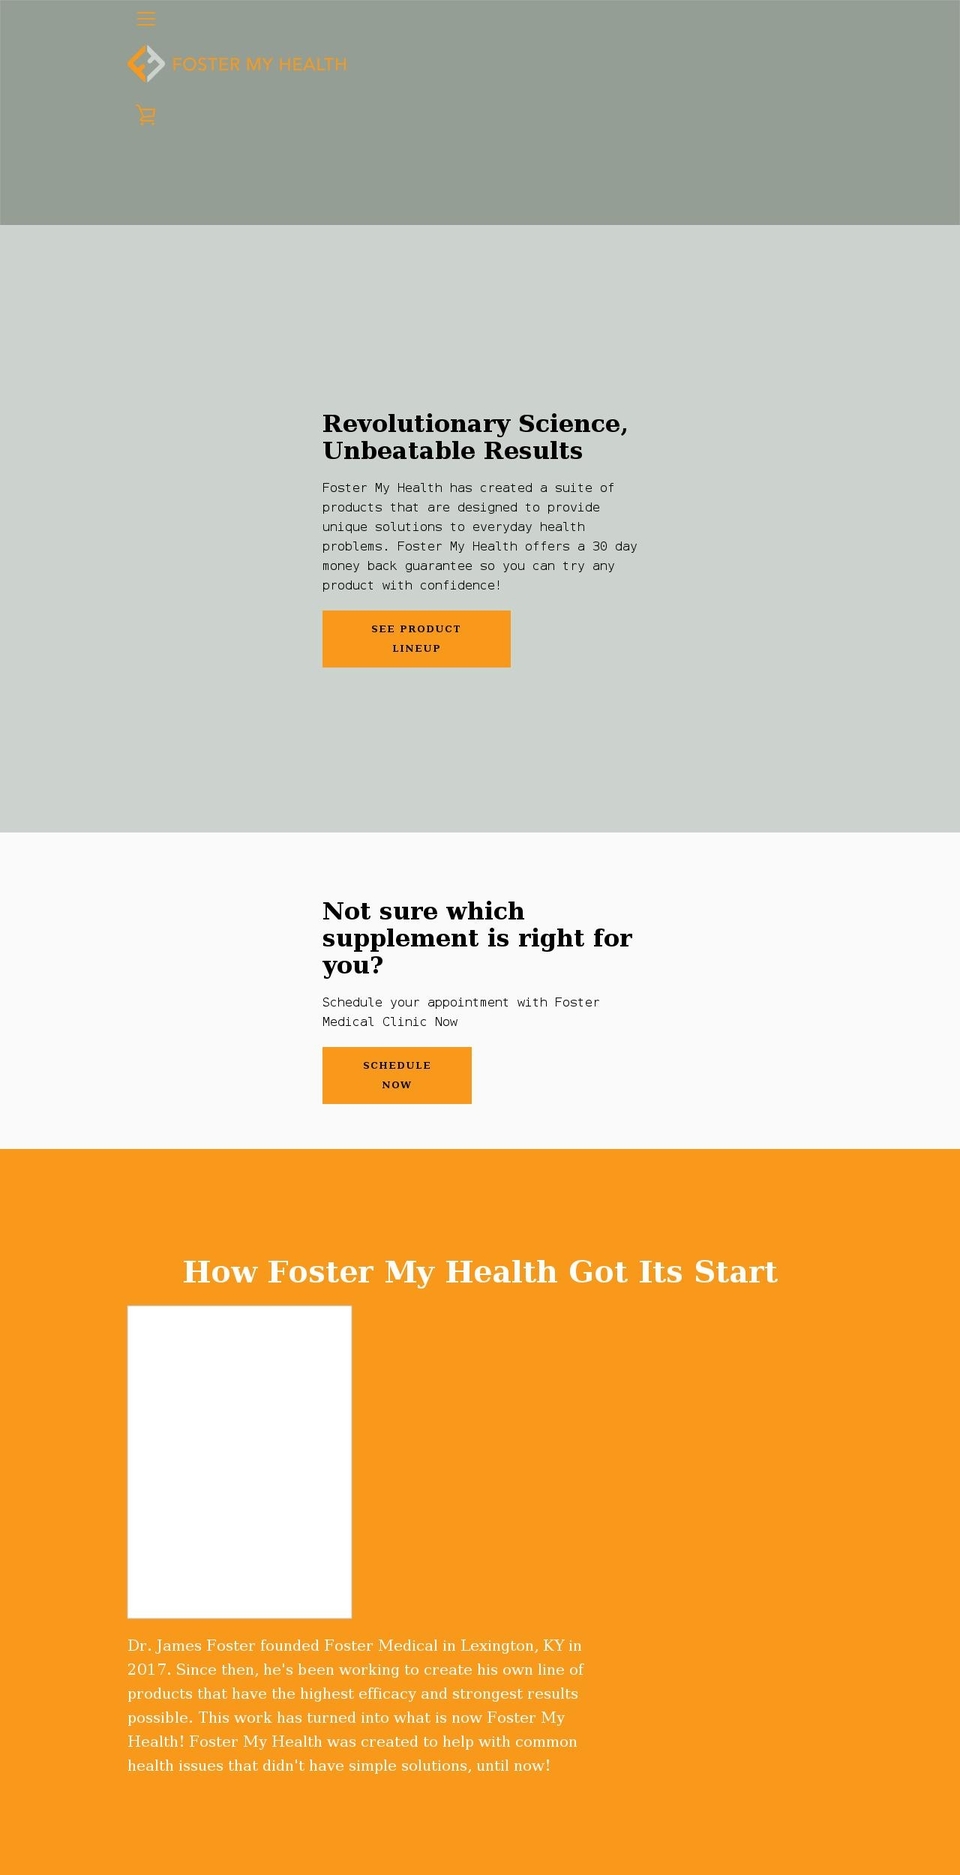 Narrative with Installments message Shopify theme site example fostermyhealth.com